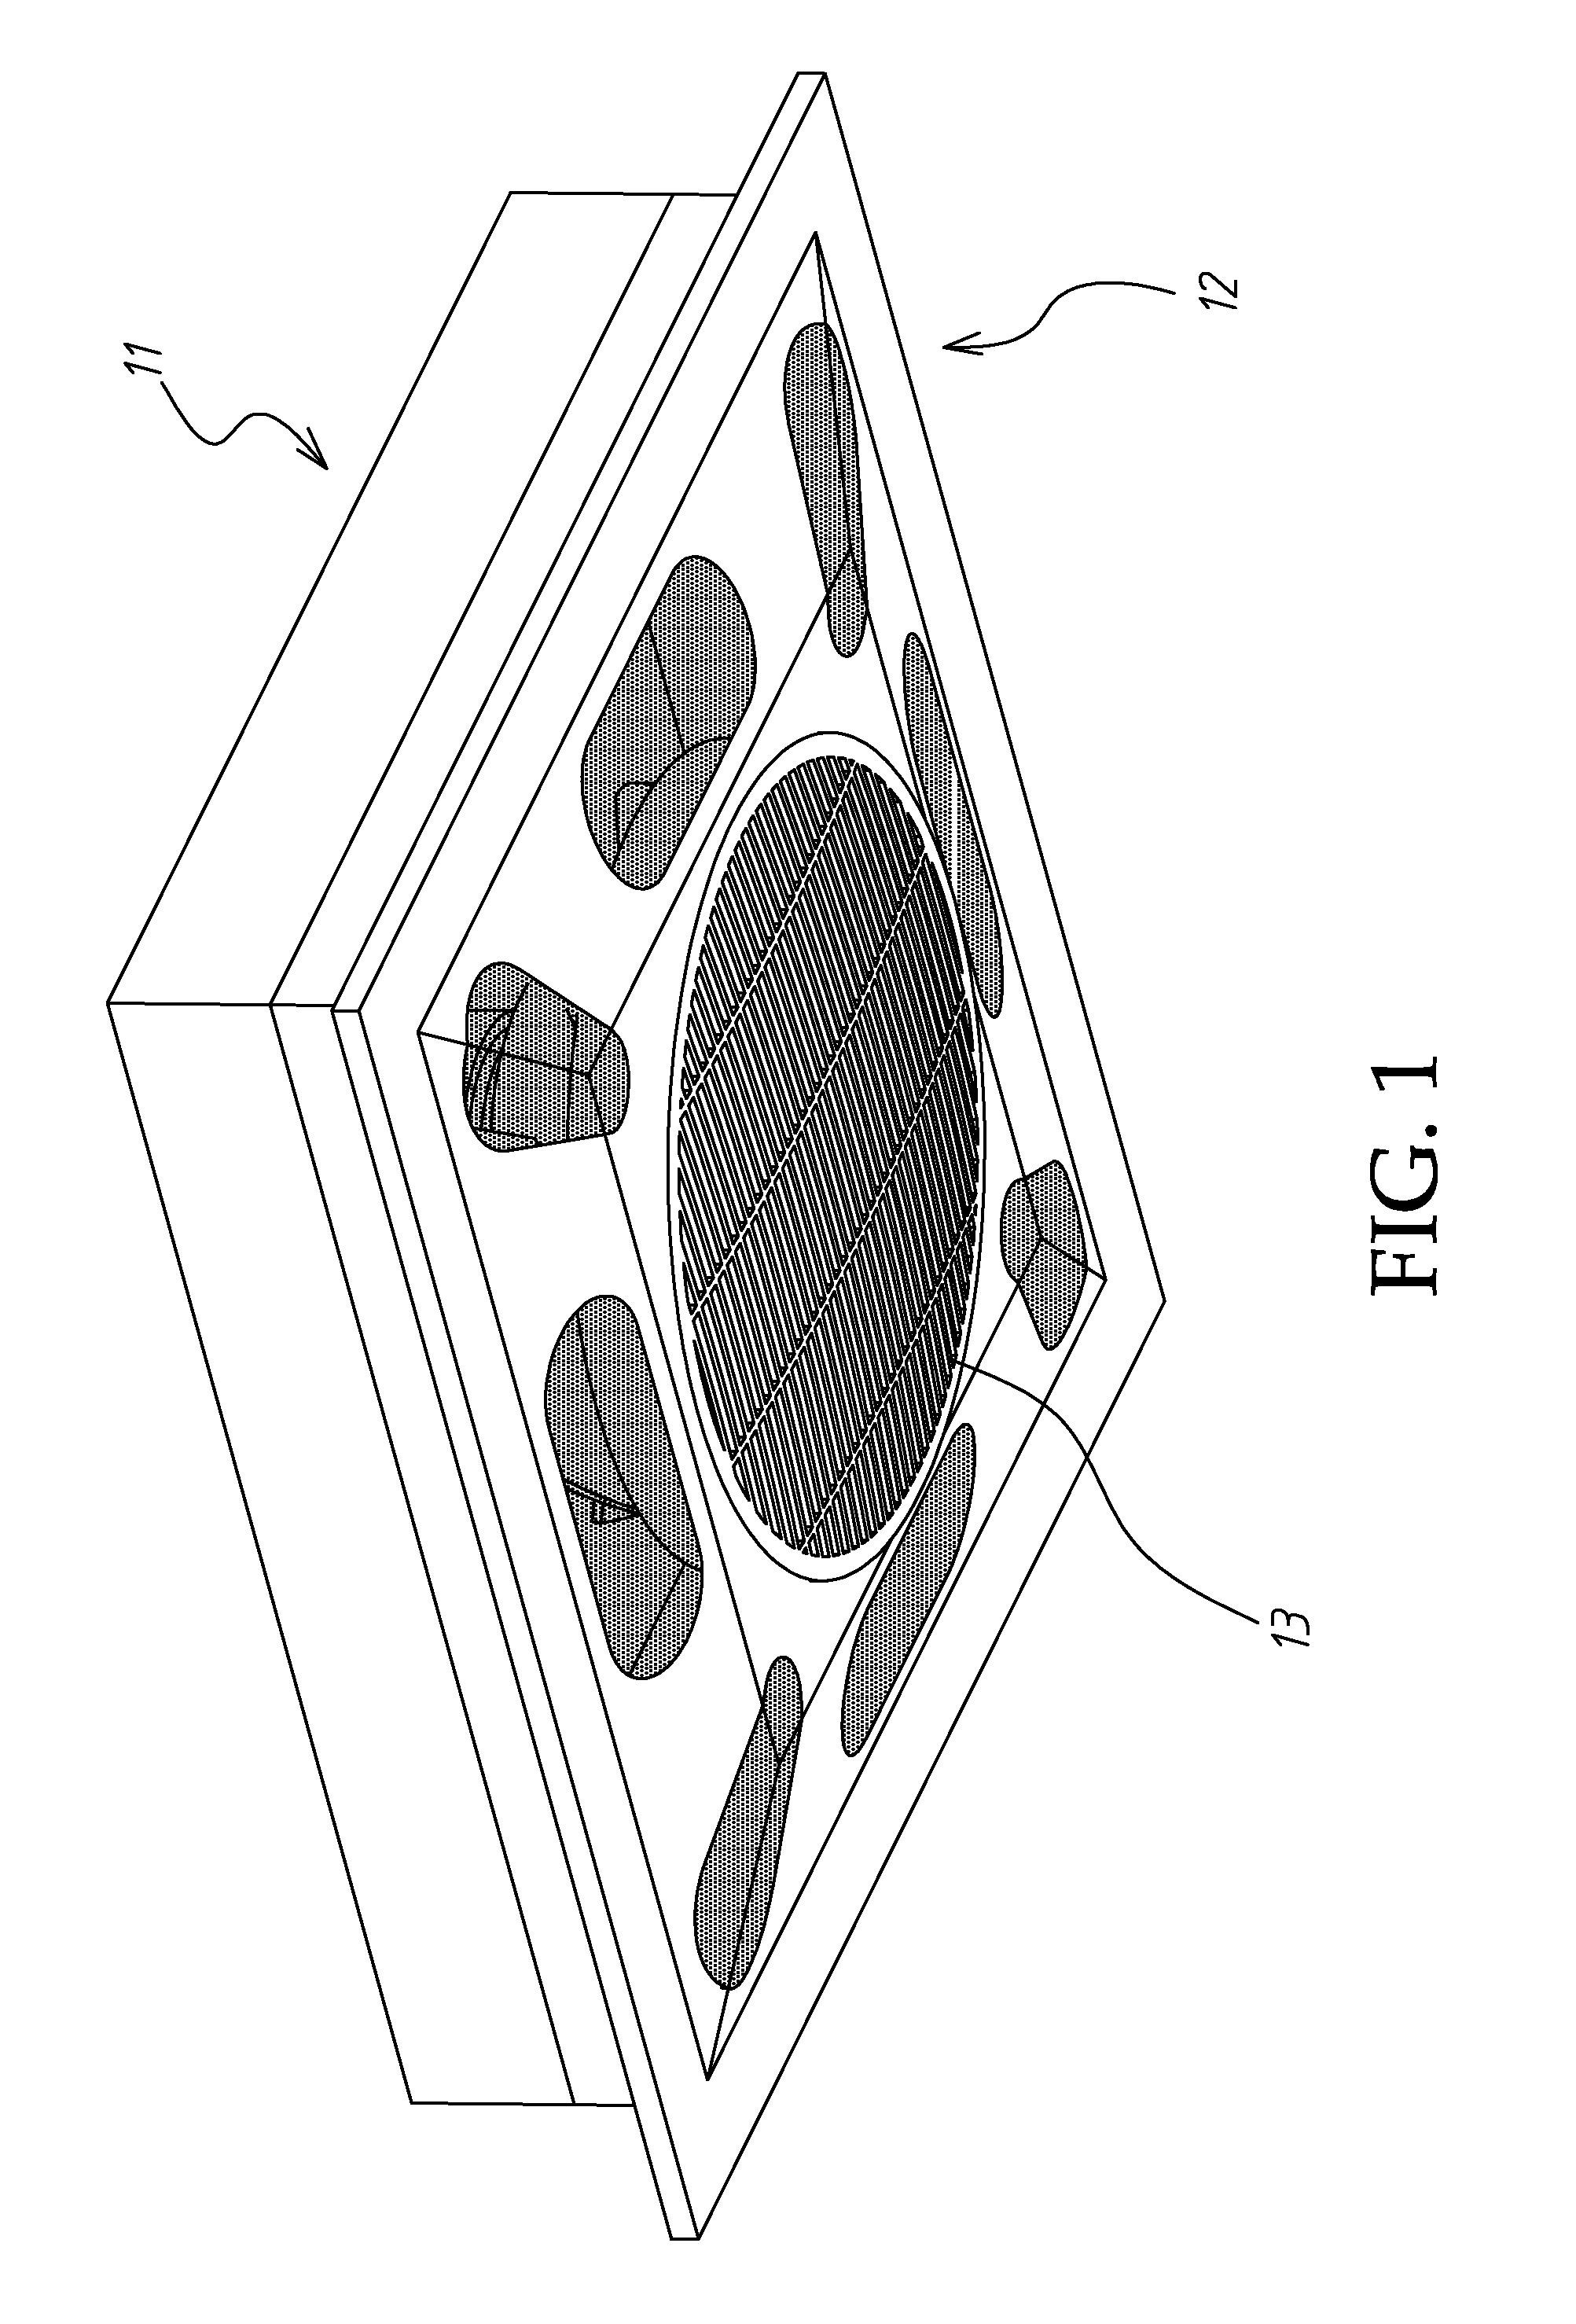 Fan structure for mounting in a light steel structure of a ceiling